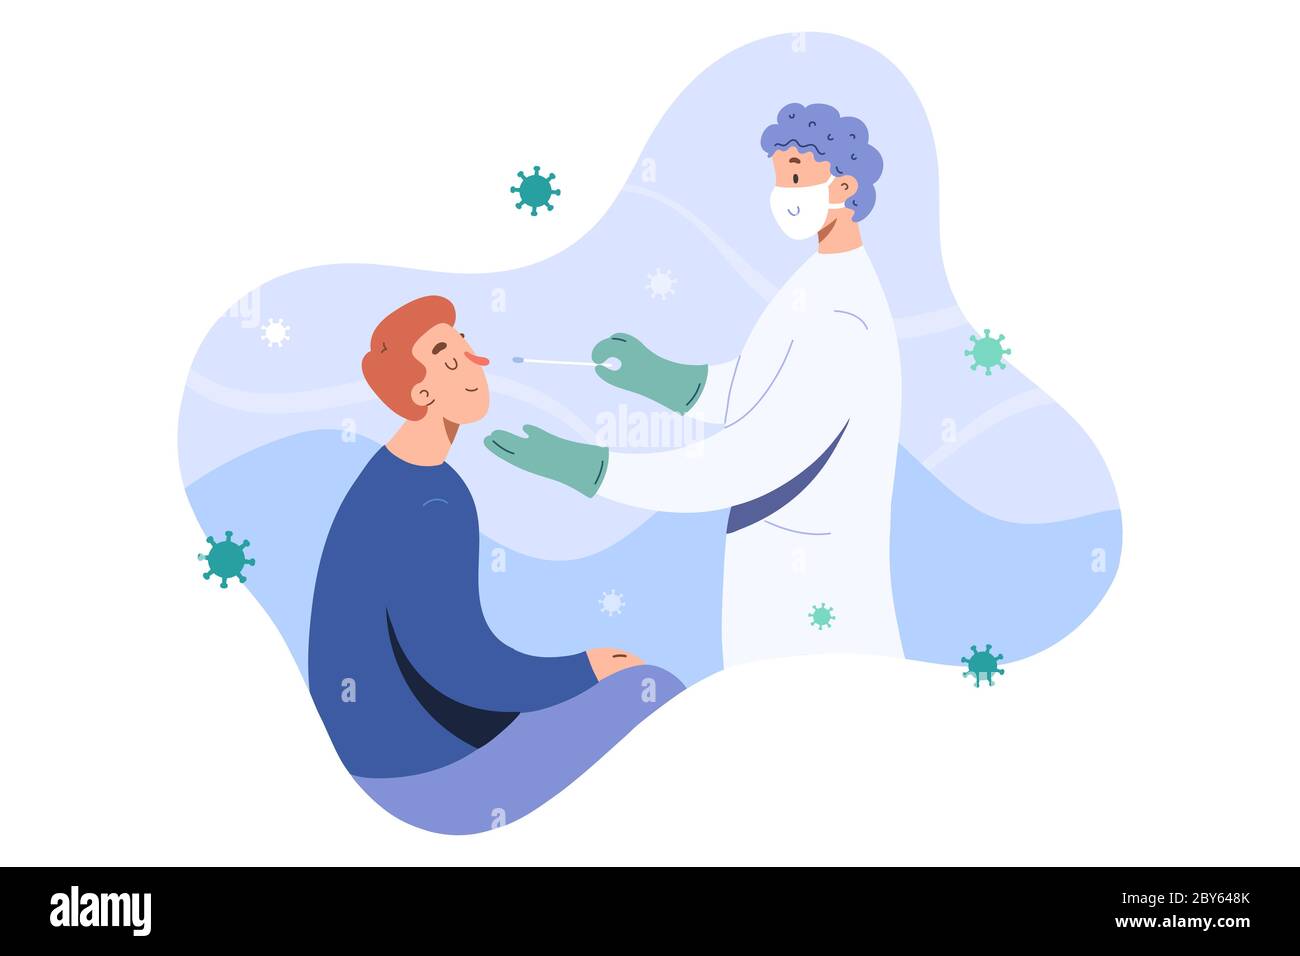 Covid test, doctor collects nose mucus by swab sample for covid-19 infection, patient being tested, lab analysis, medical checkup, flat cartoon vector Stock Vector